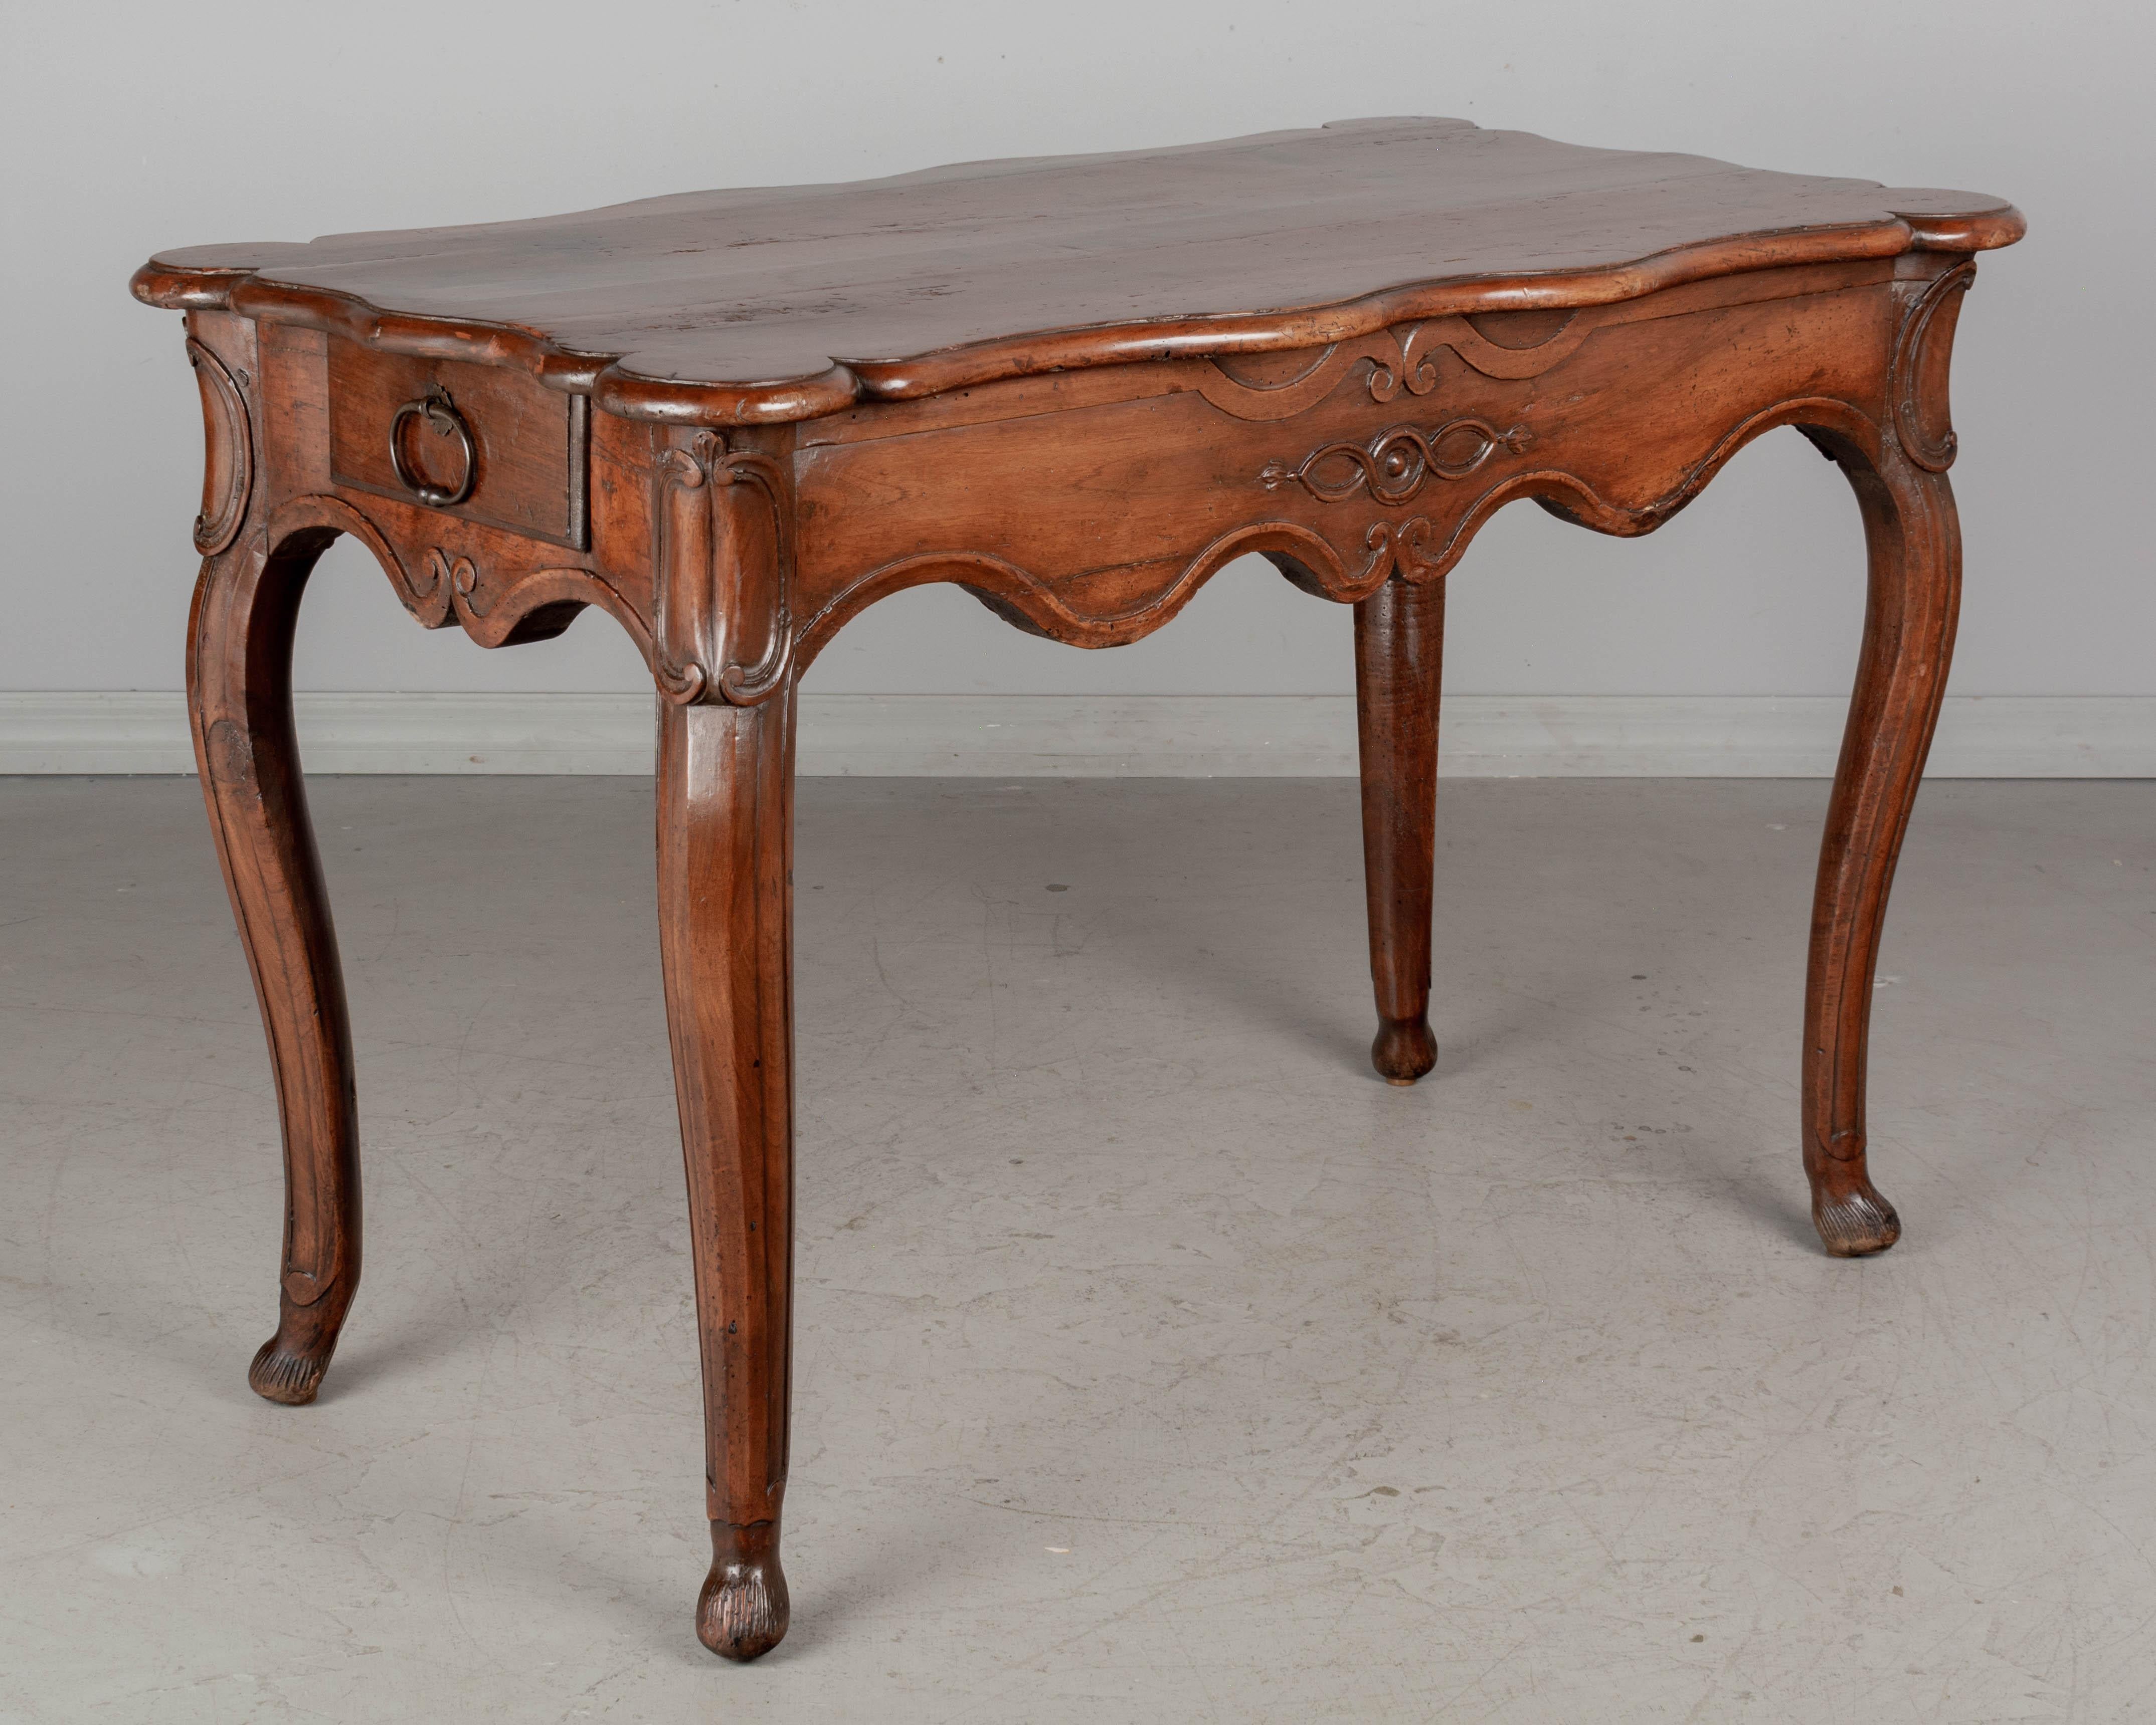 An 18th century French Louis XV table from Provence. Made of solid walnut with deep hand-carved apron and thick cabriole legs. Two dovetailed drawers, one on each side, each with iron loop pulls. Shaped top with rounded corners. Beautiful character